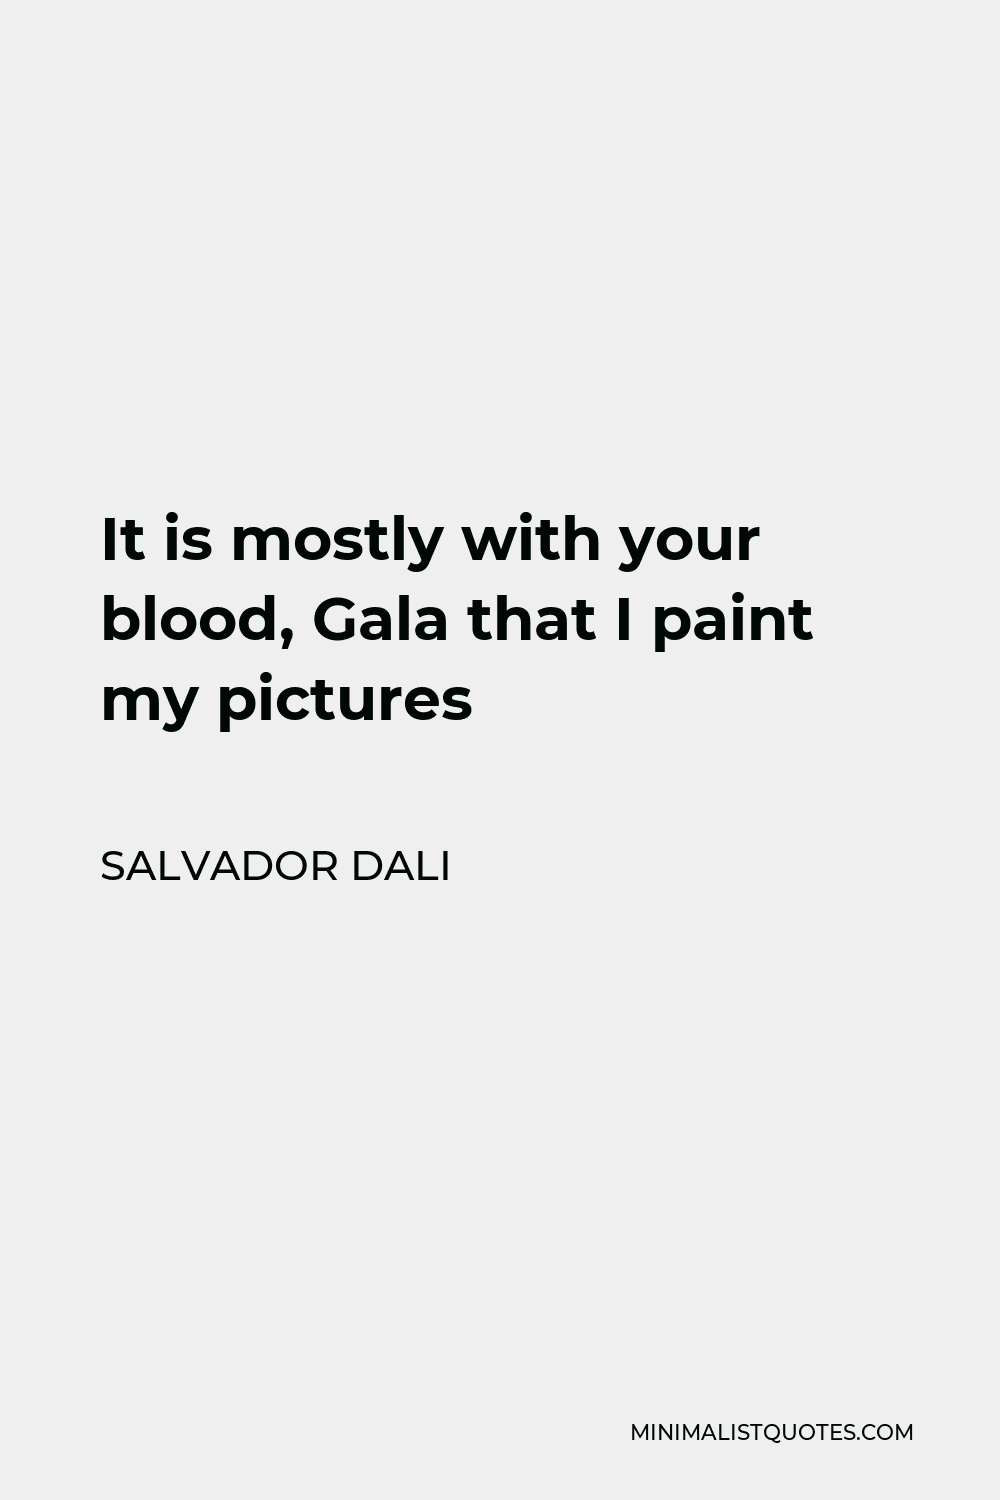 Salvador Dali Quote - It is mostly with your blood, Gala that I paint my pictures